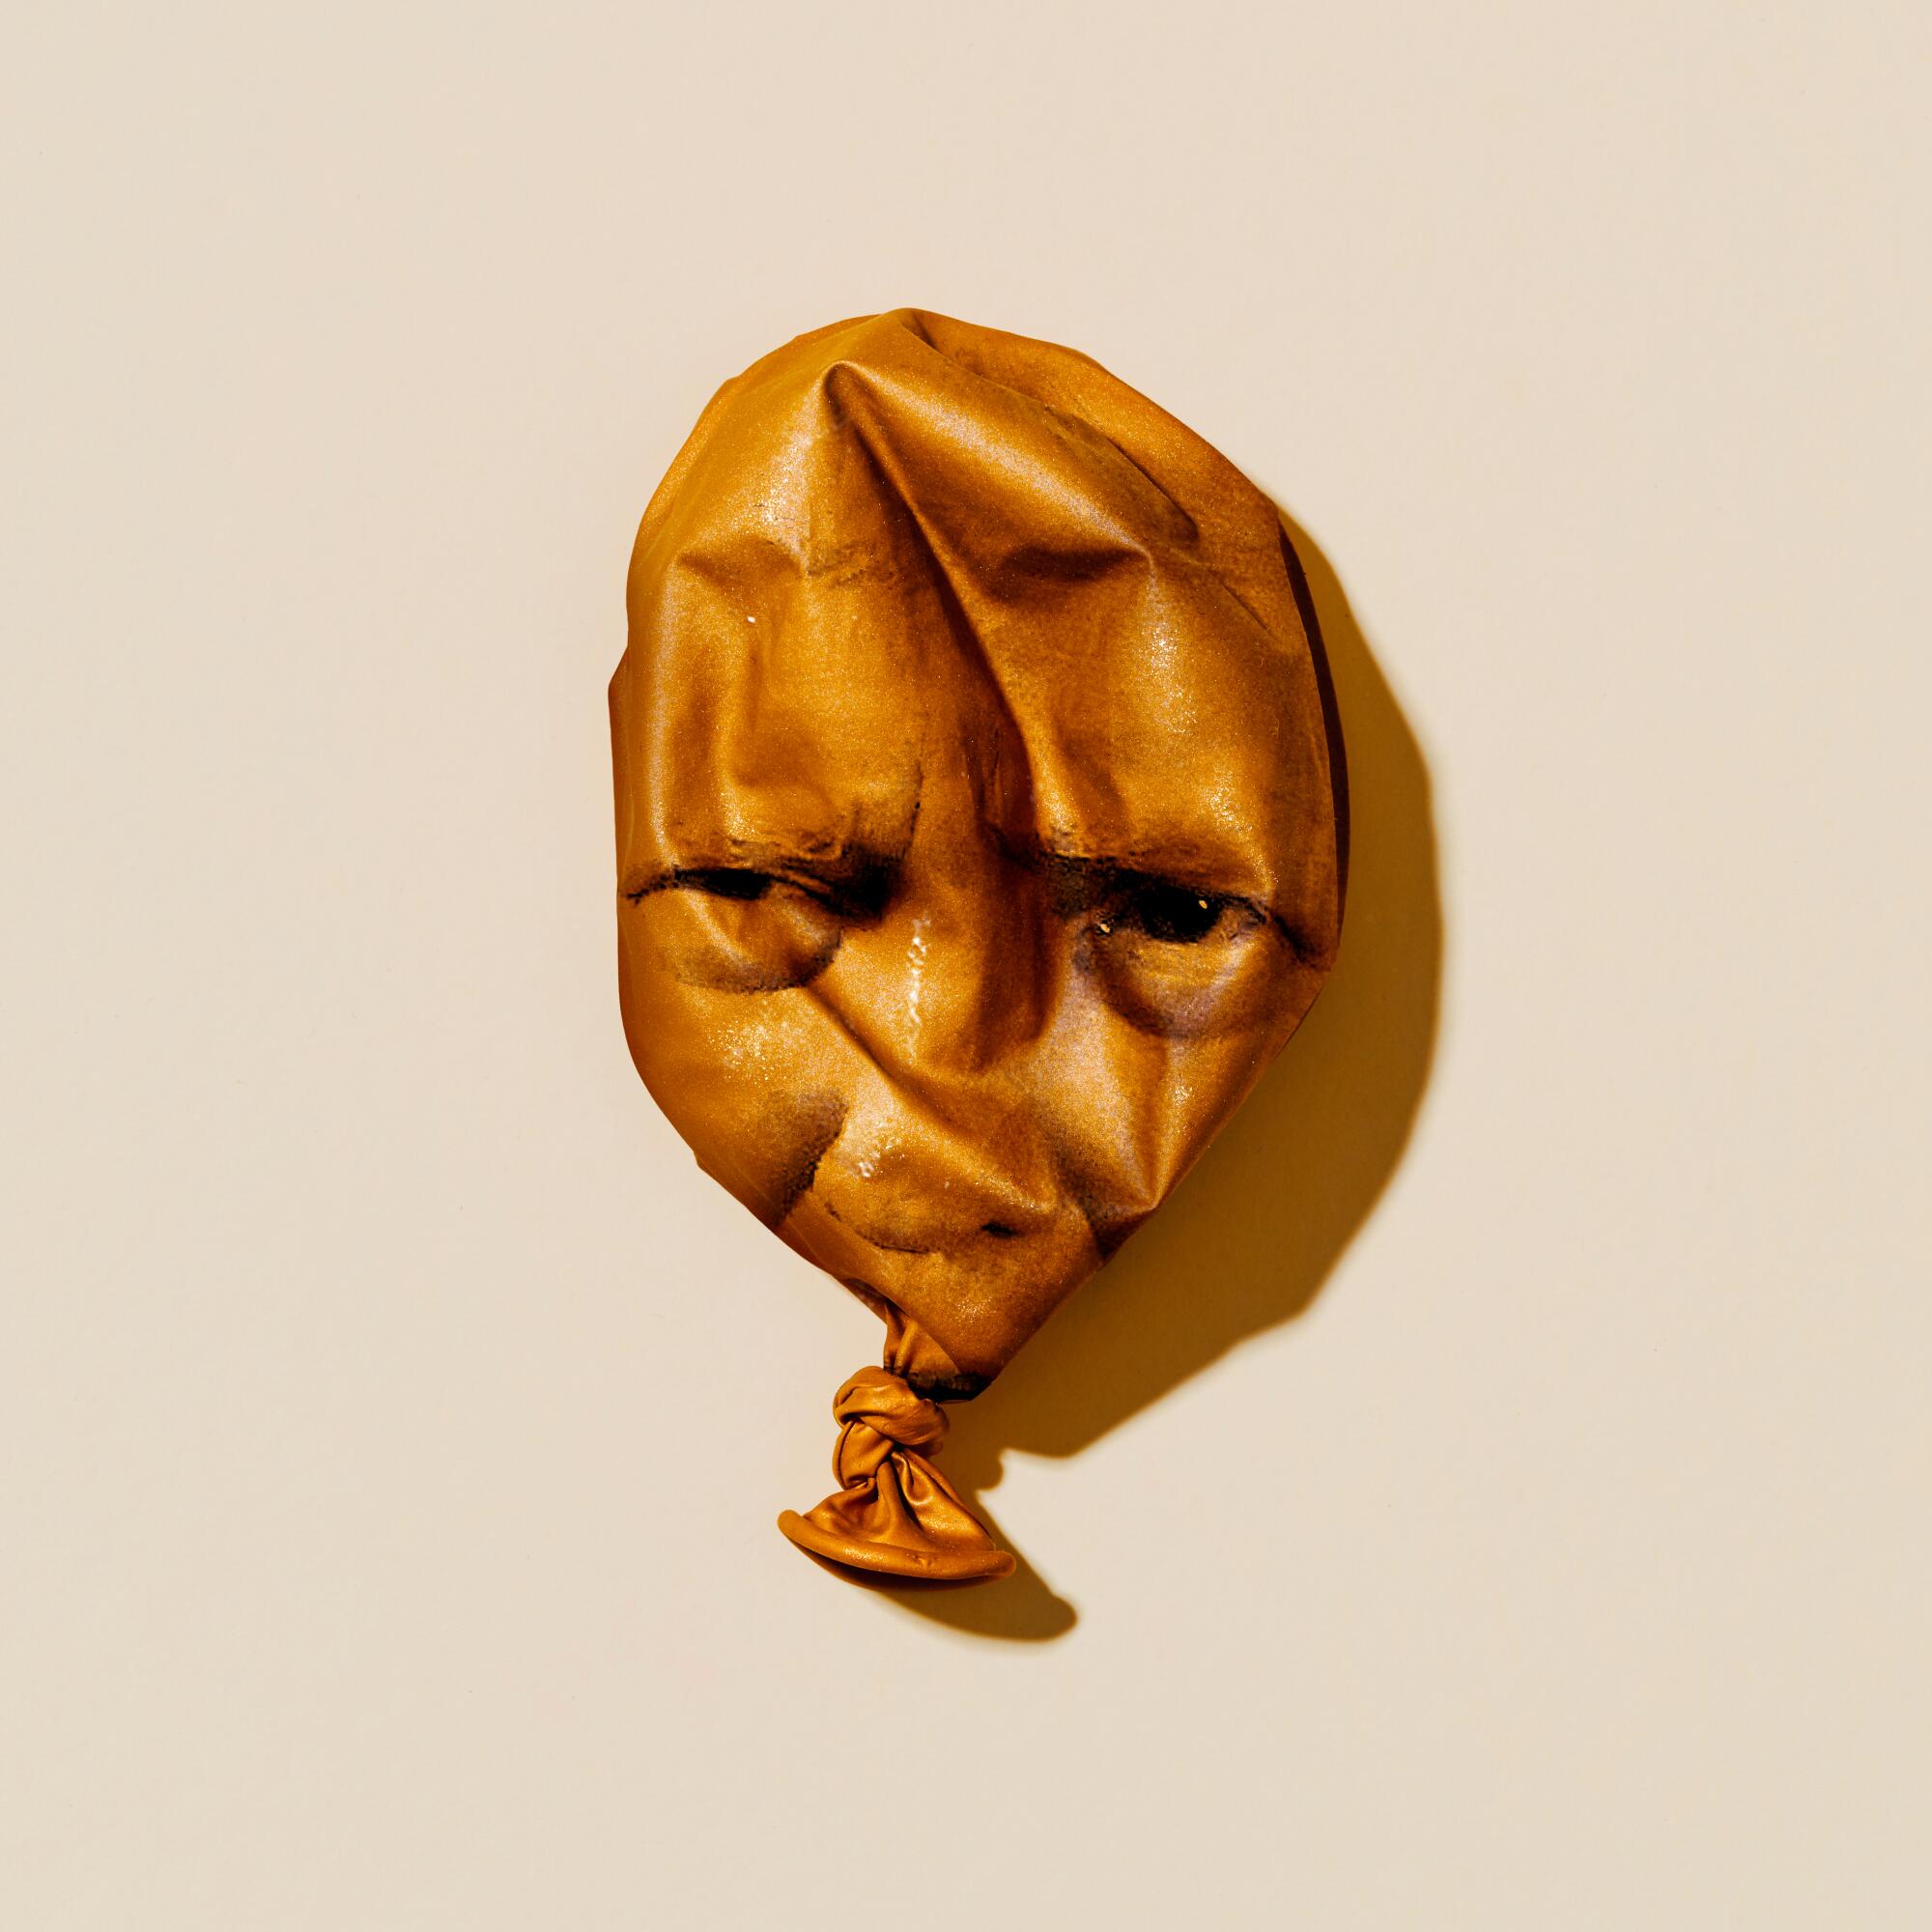 Photo illustration of a deflated gold balloon with Donald Trump's face on it.